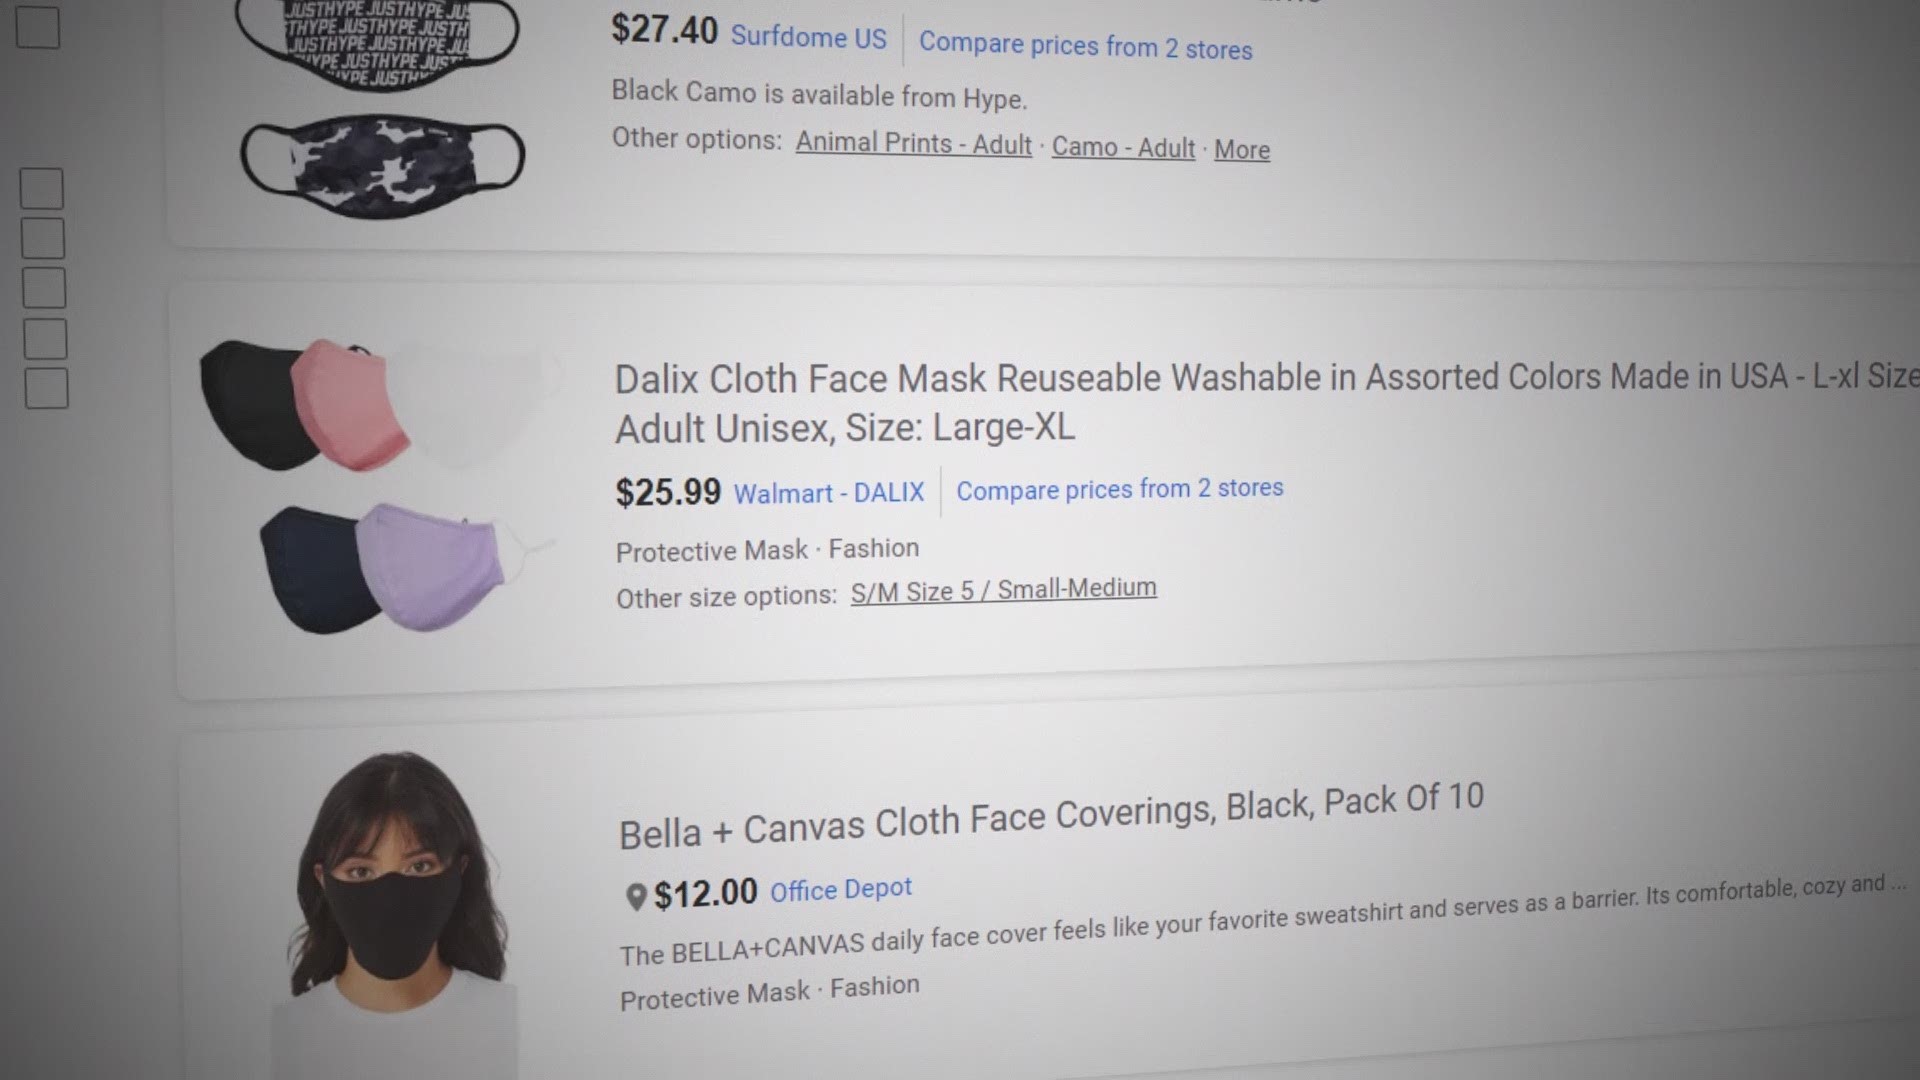 Best High Fashion Face Masks Throughout History